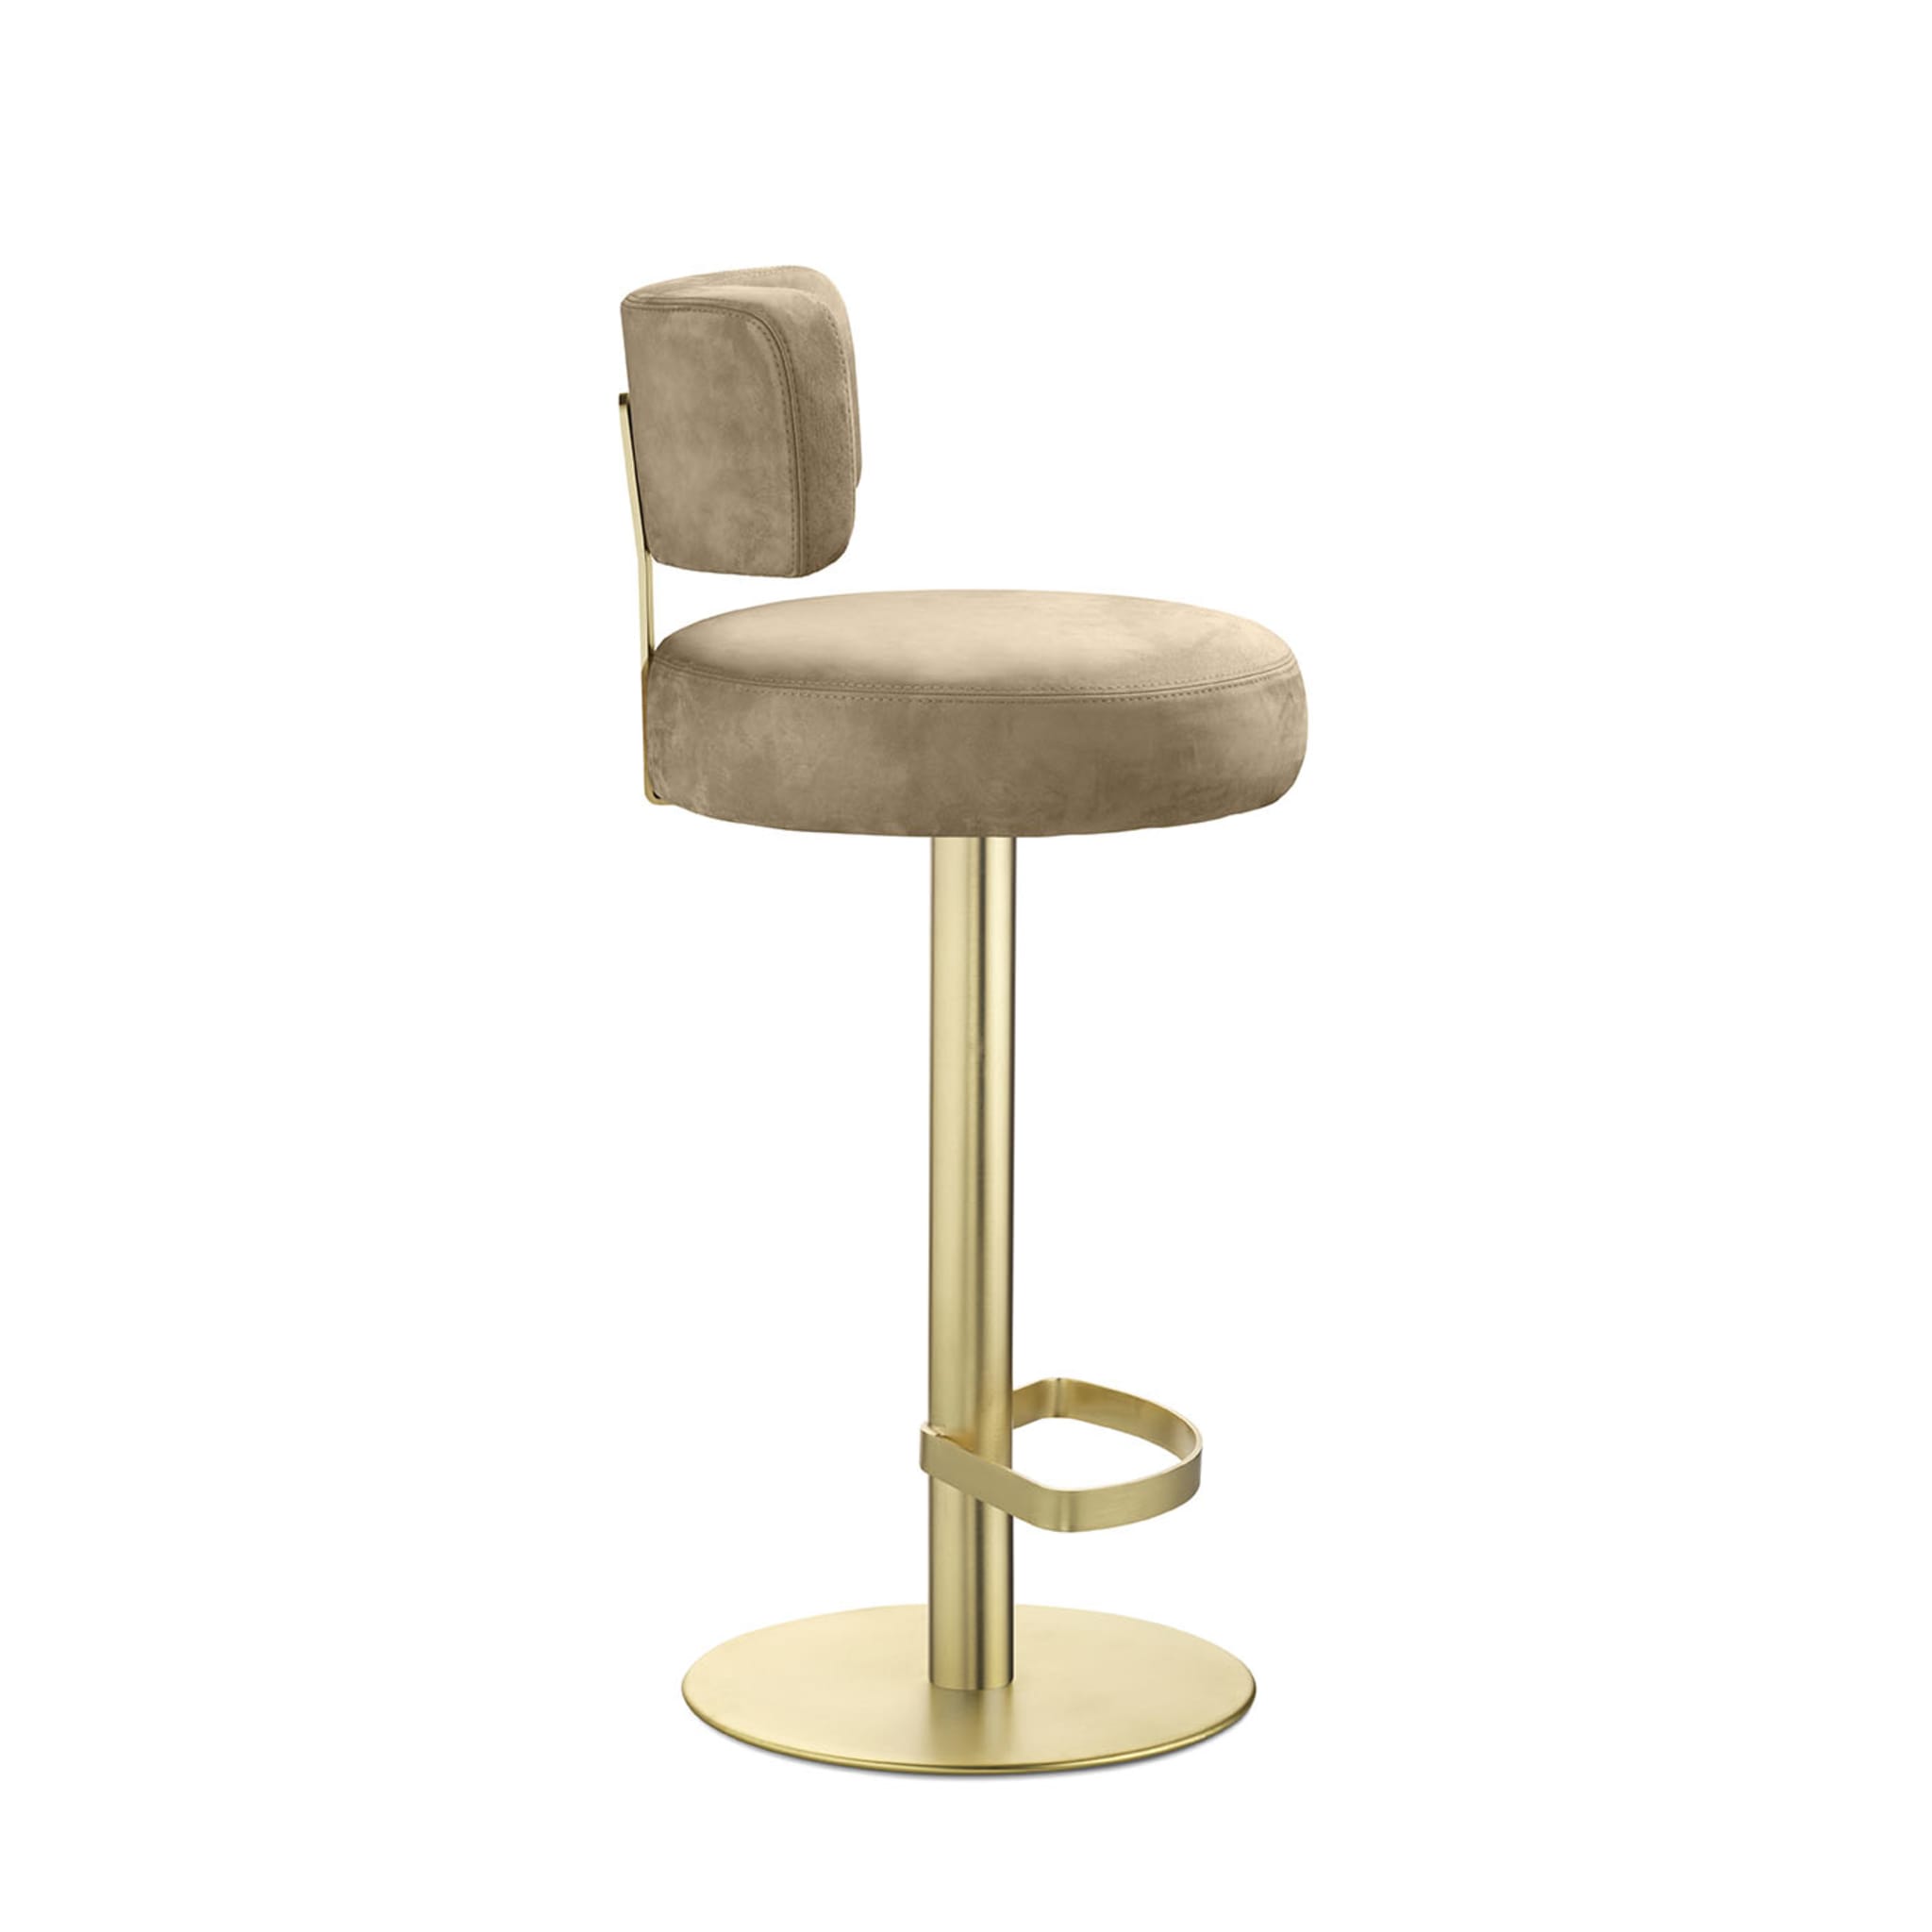 Alfred fixed Gold Bar Stool - Alternative view 2